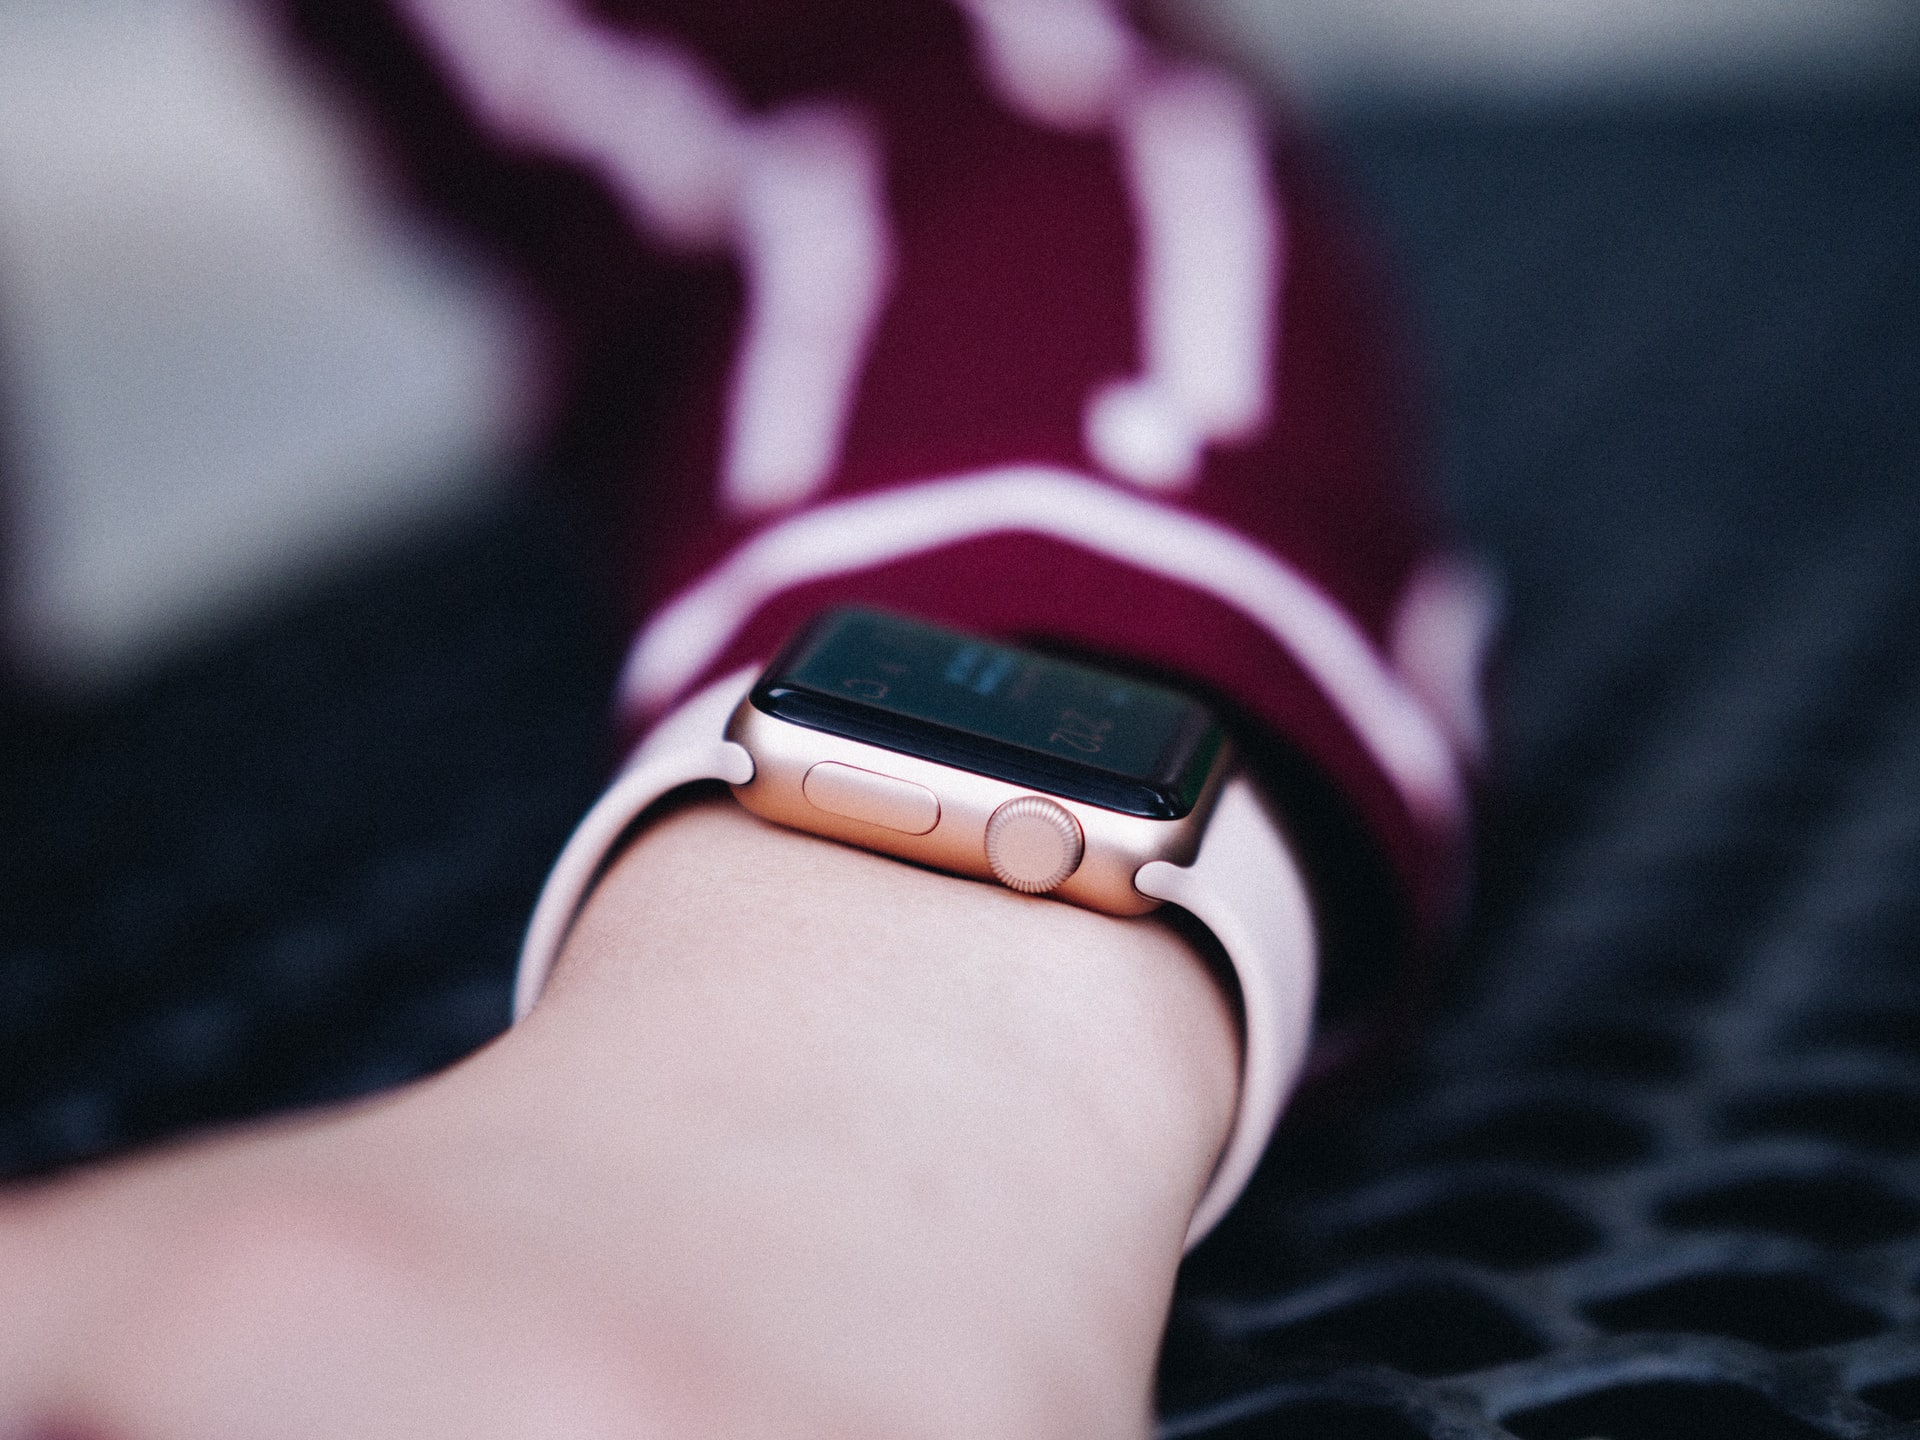 Social Distancing Smart watches